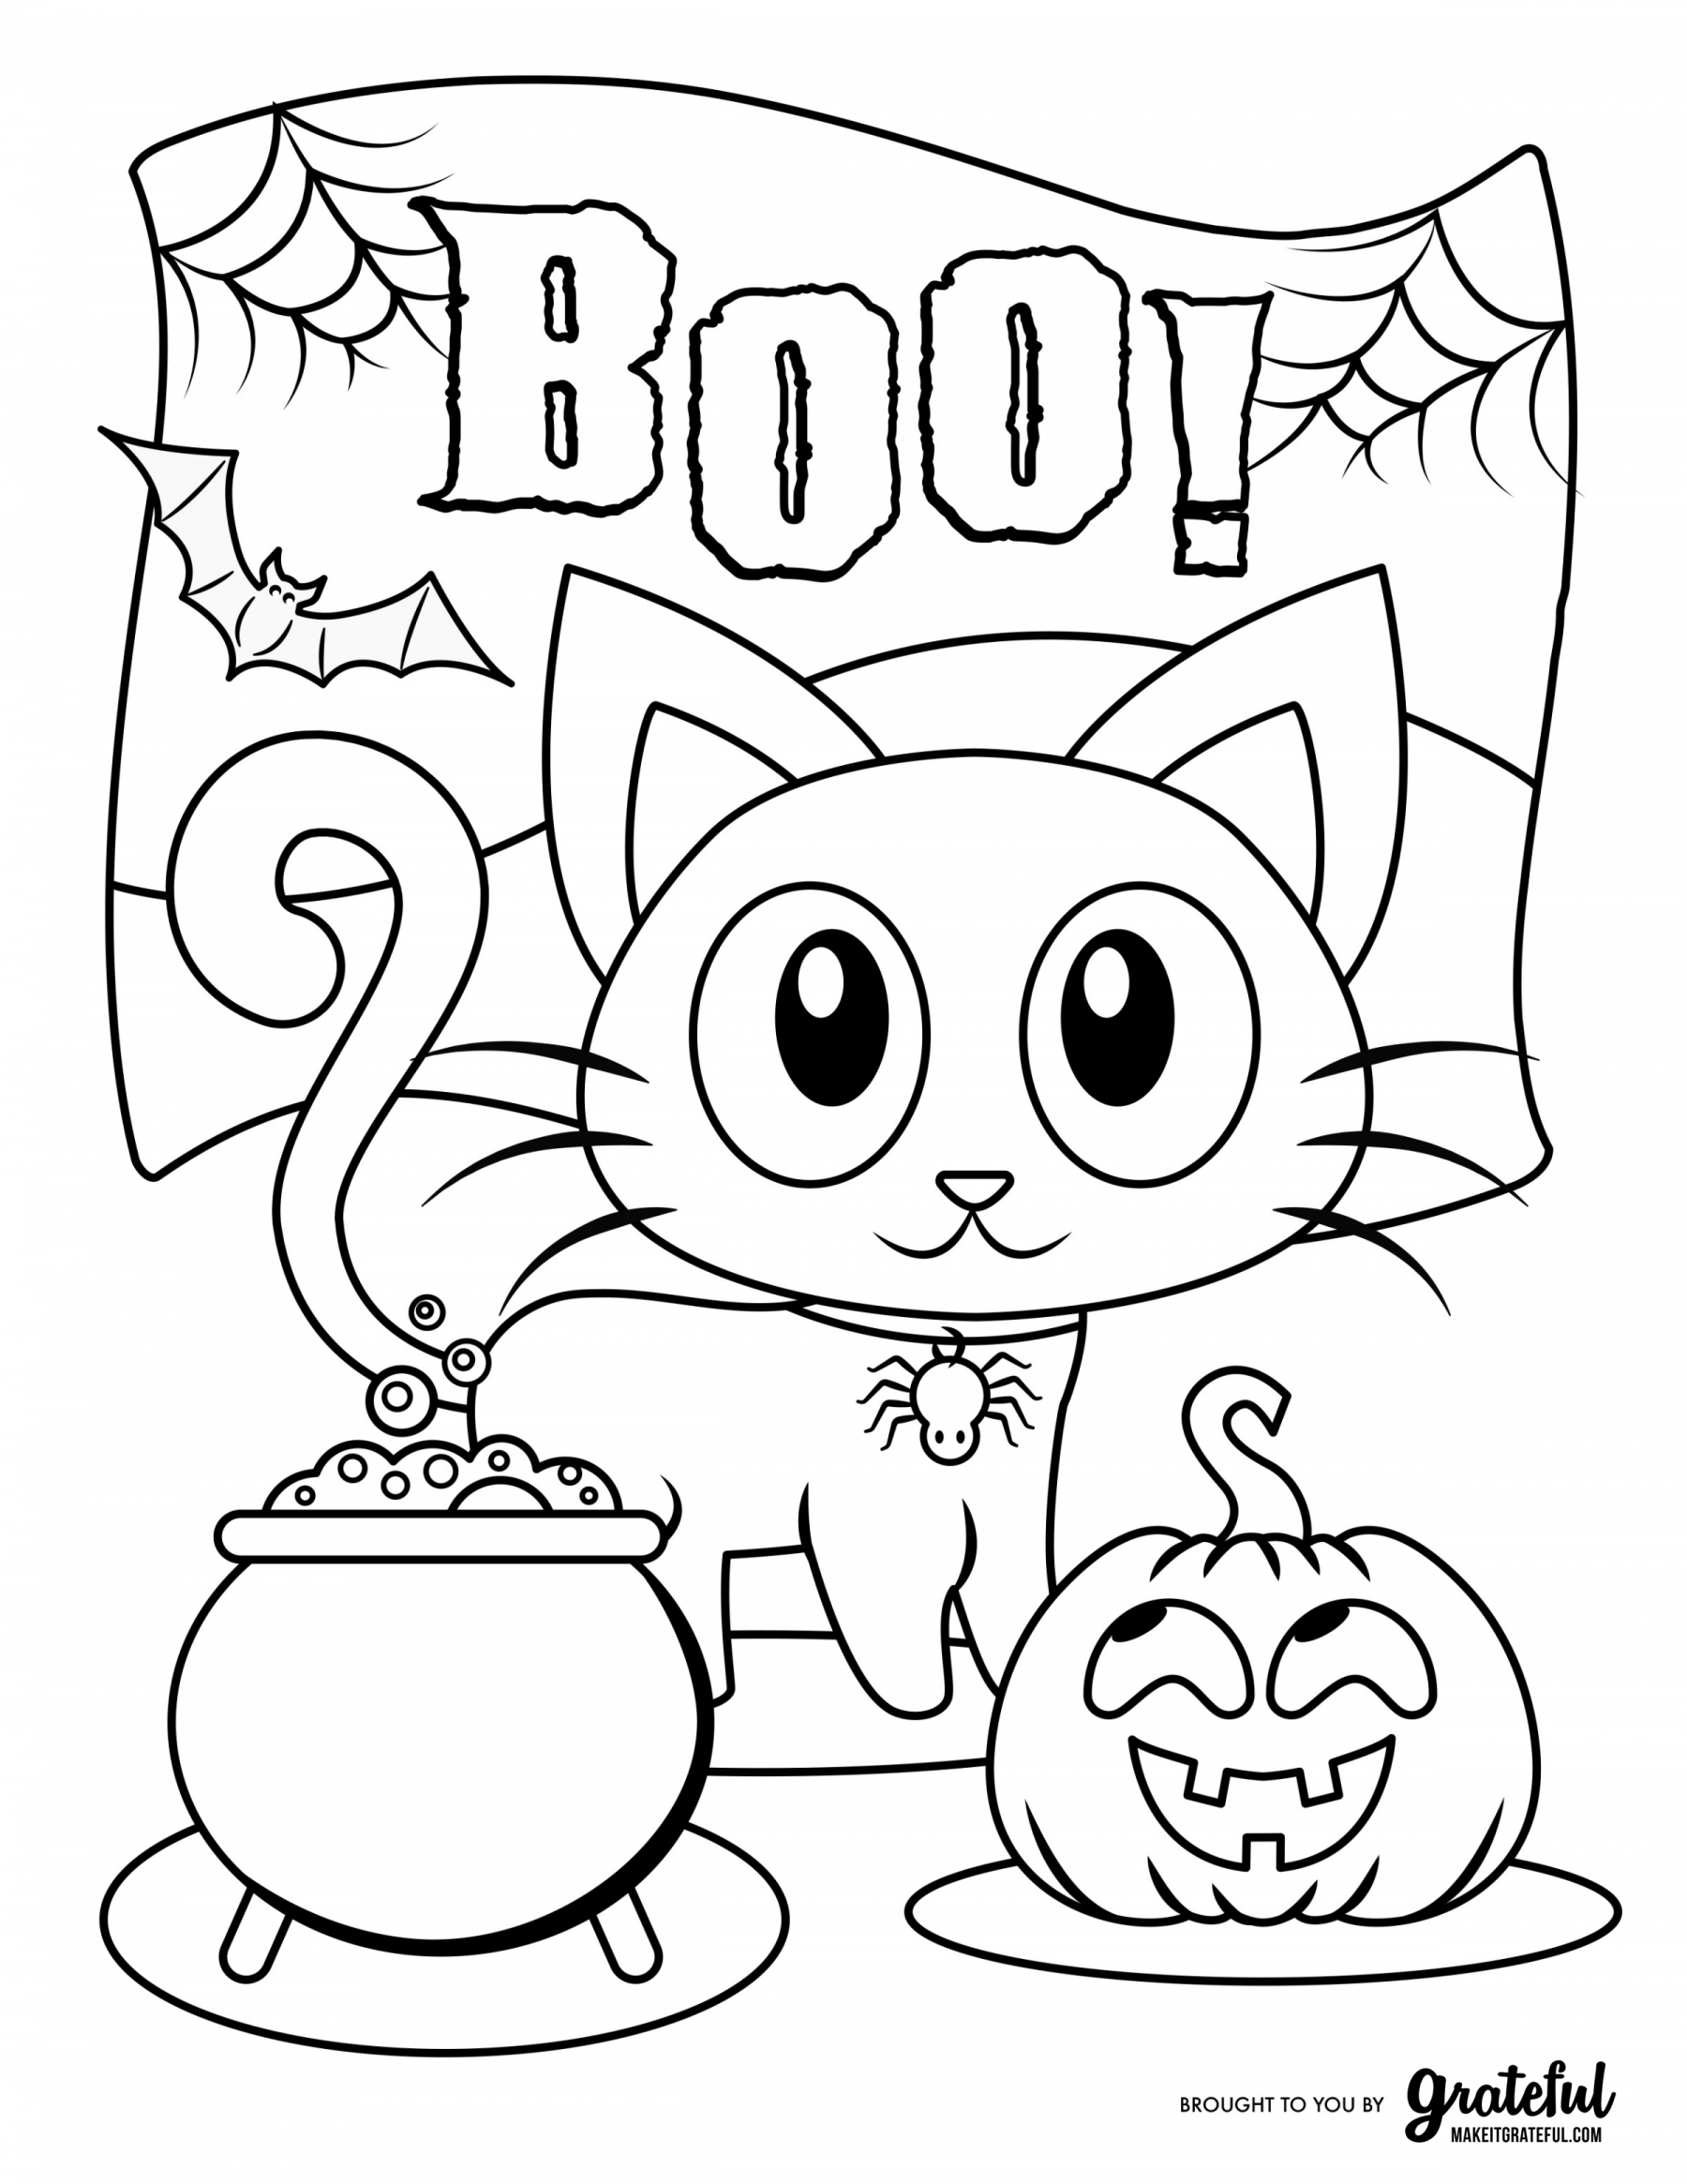 Free Halloween Coloring Pages For Kids or For The Kid In You ...